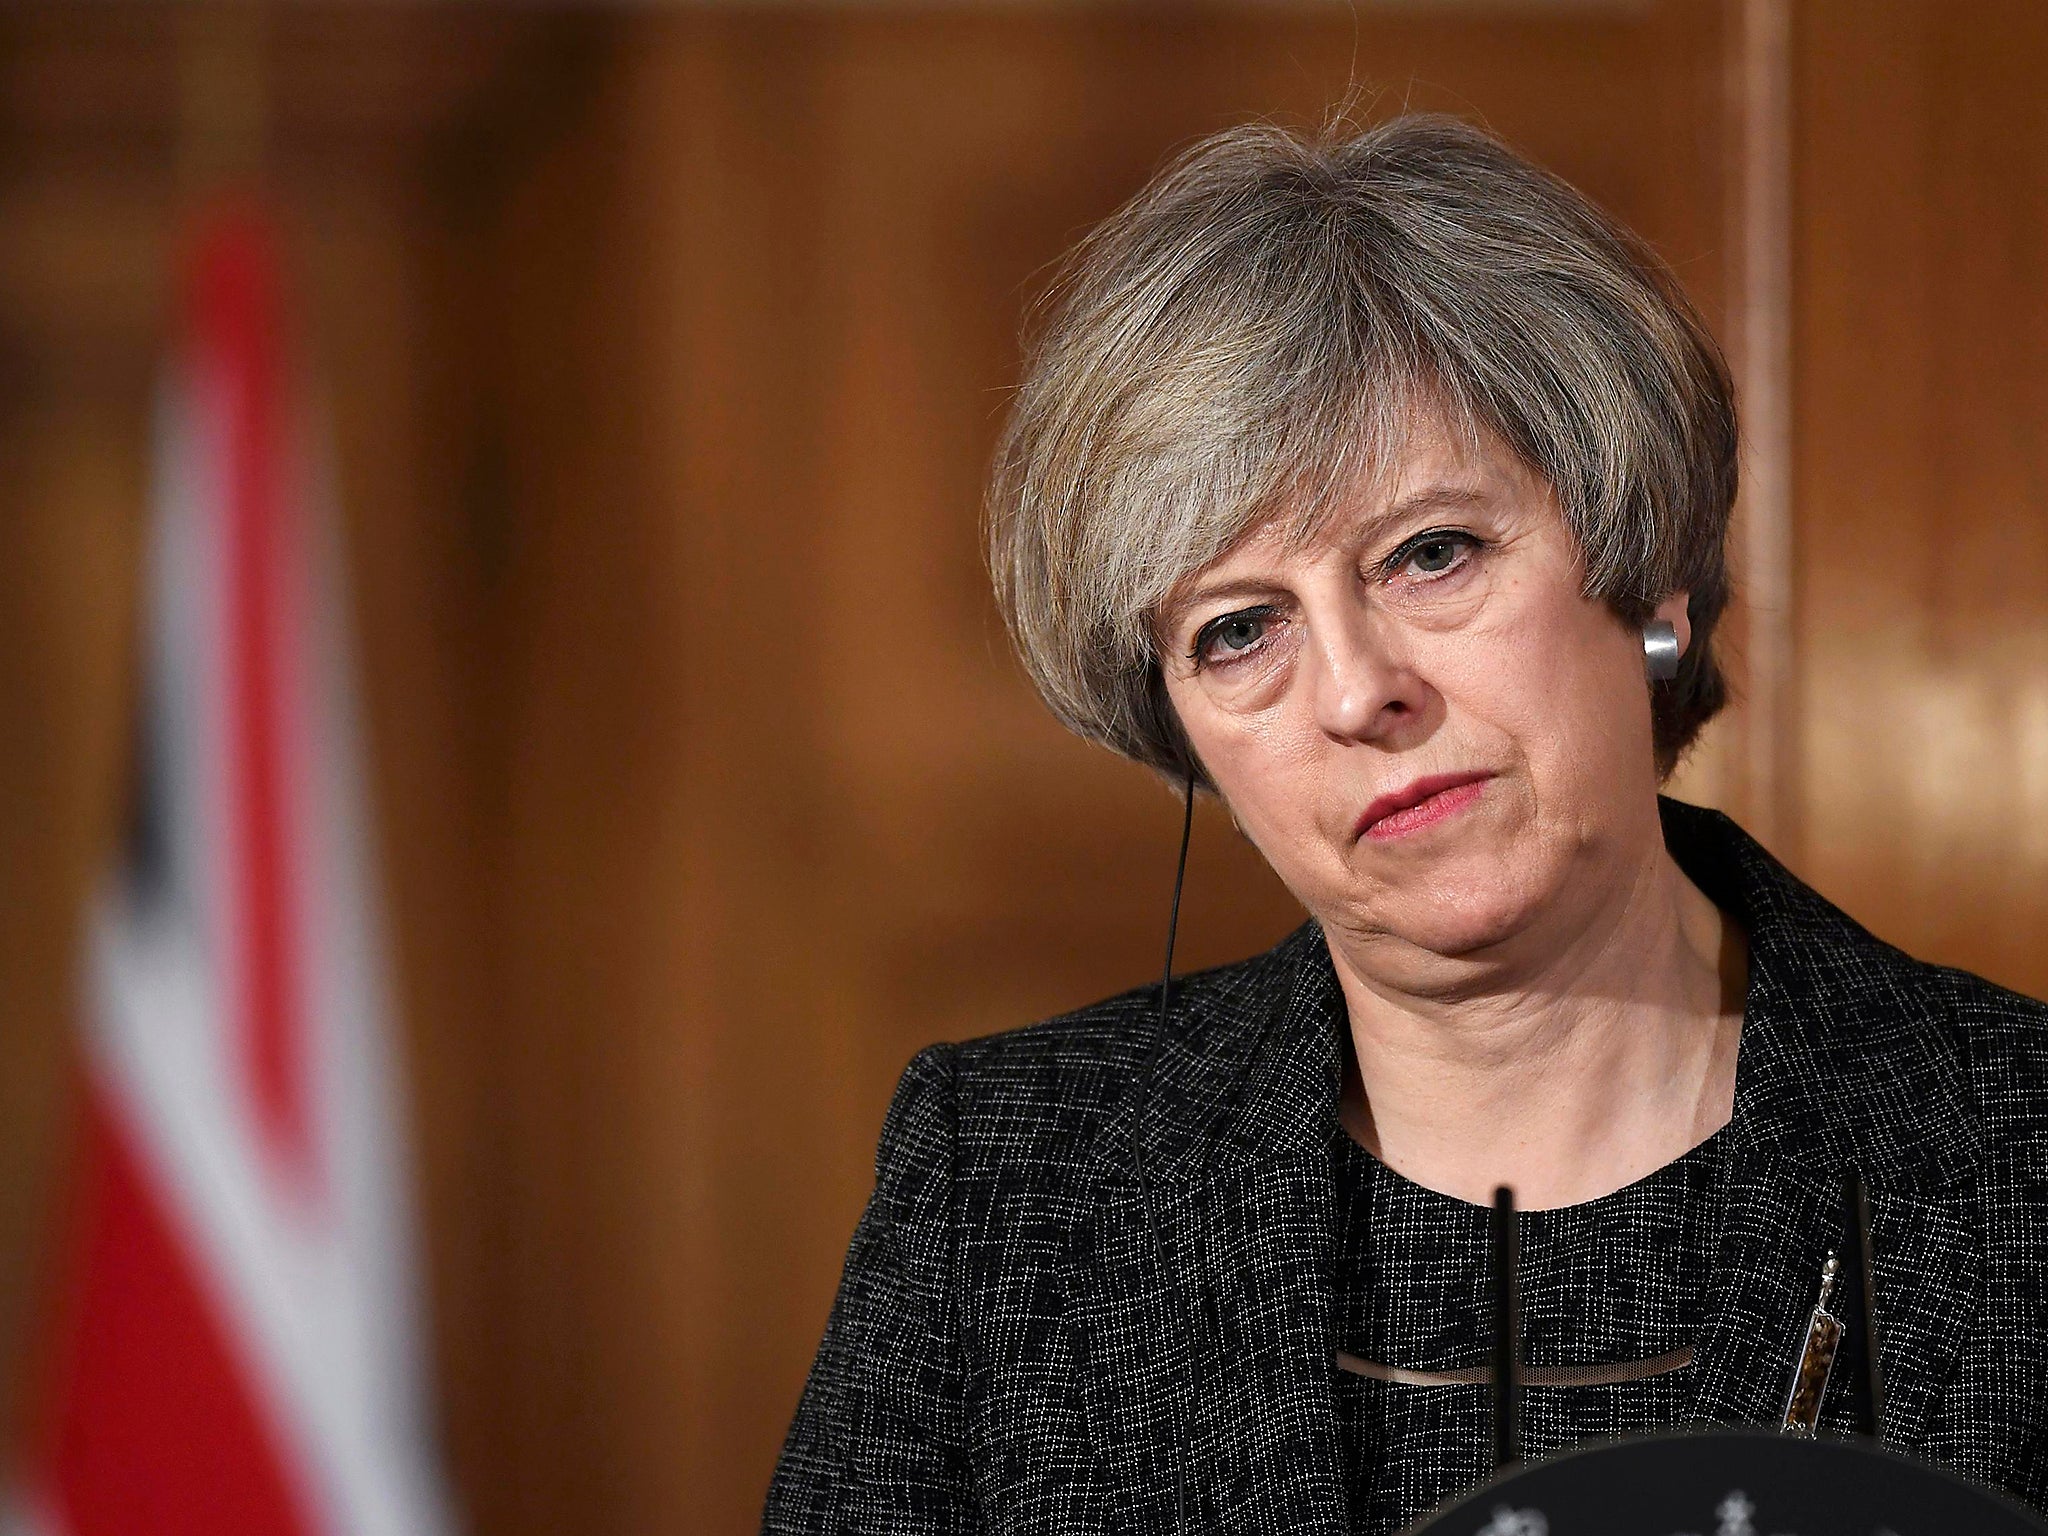 May’s government denies that it wishes to restrict public whistleblowing – but it has already restricted civil liberties by passing the Investigatory Powers Act